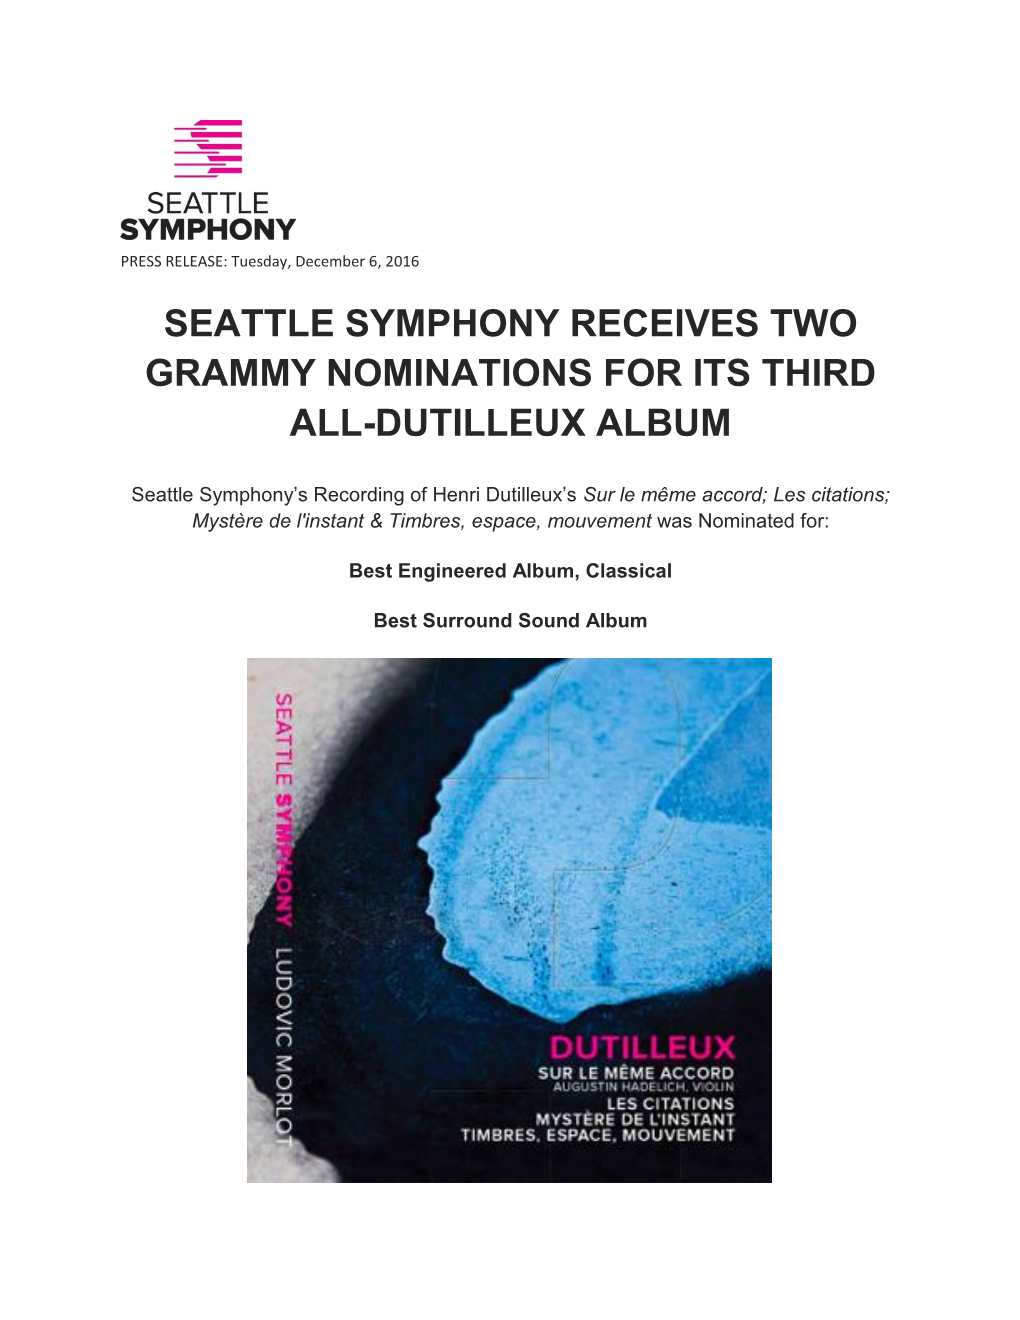 Seattle Symphony Receives Two Grammy Nominations for Its Third All-Dutilleux Album